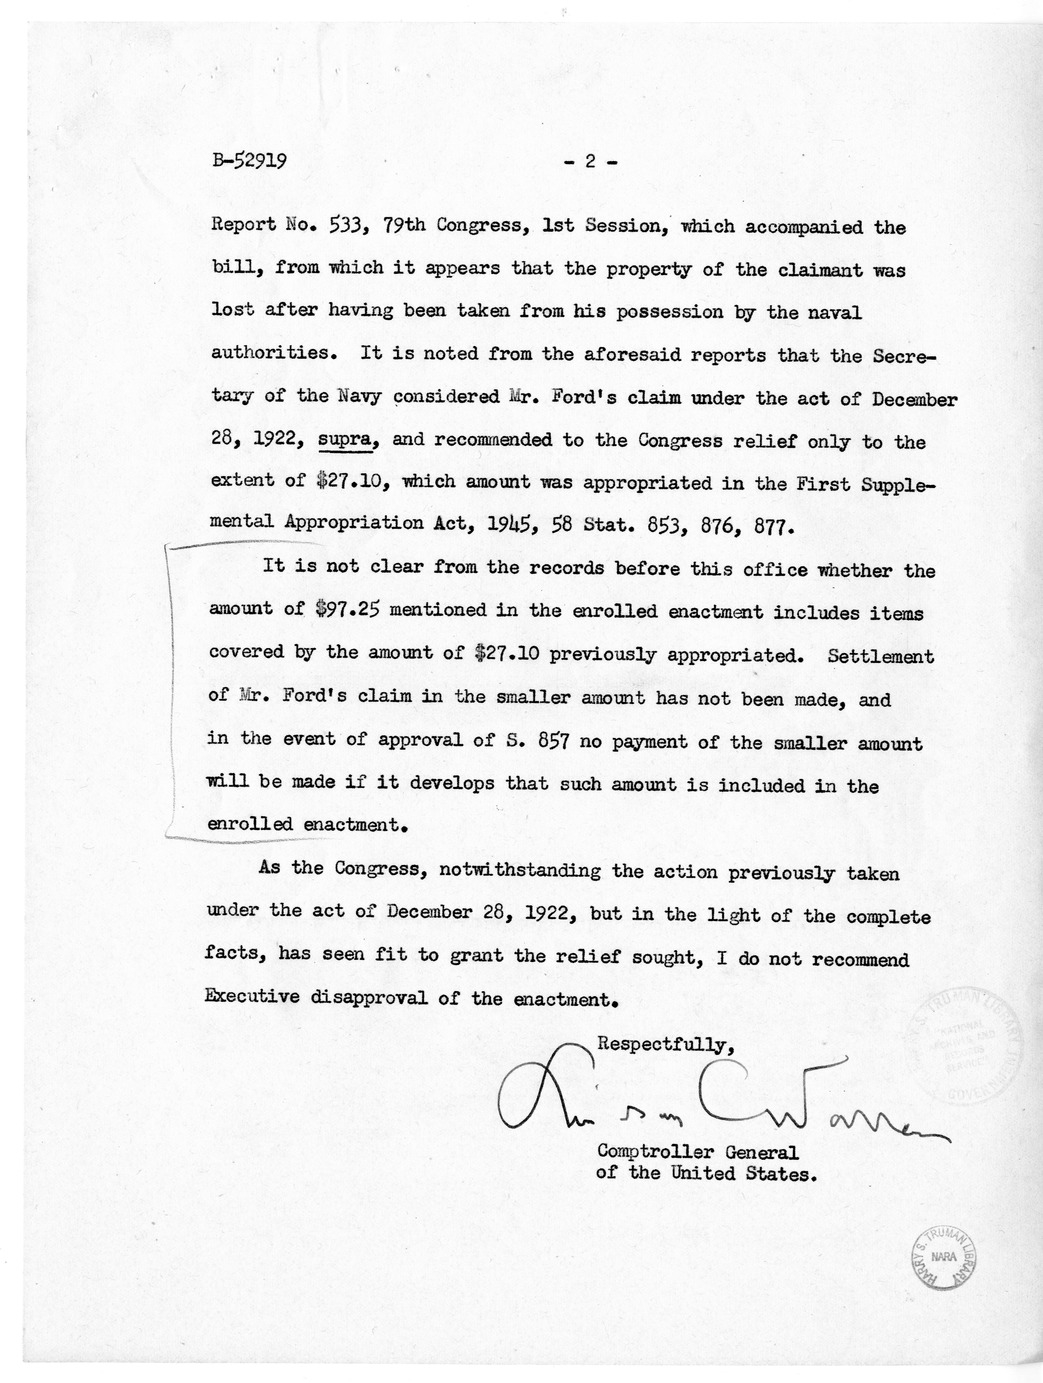 Memorandum from Paul H. Appleby to M. C. Latta, H.R. 857, For the Relief of Raymond W. Ford, with Attachments